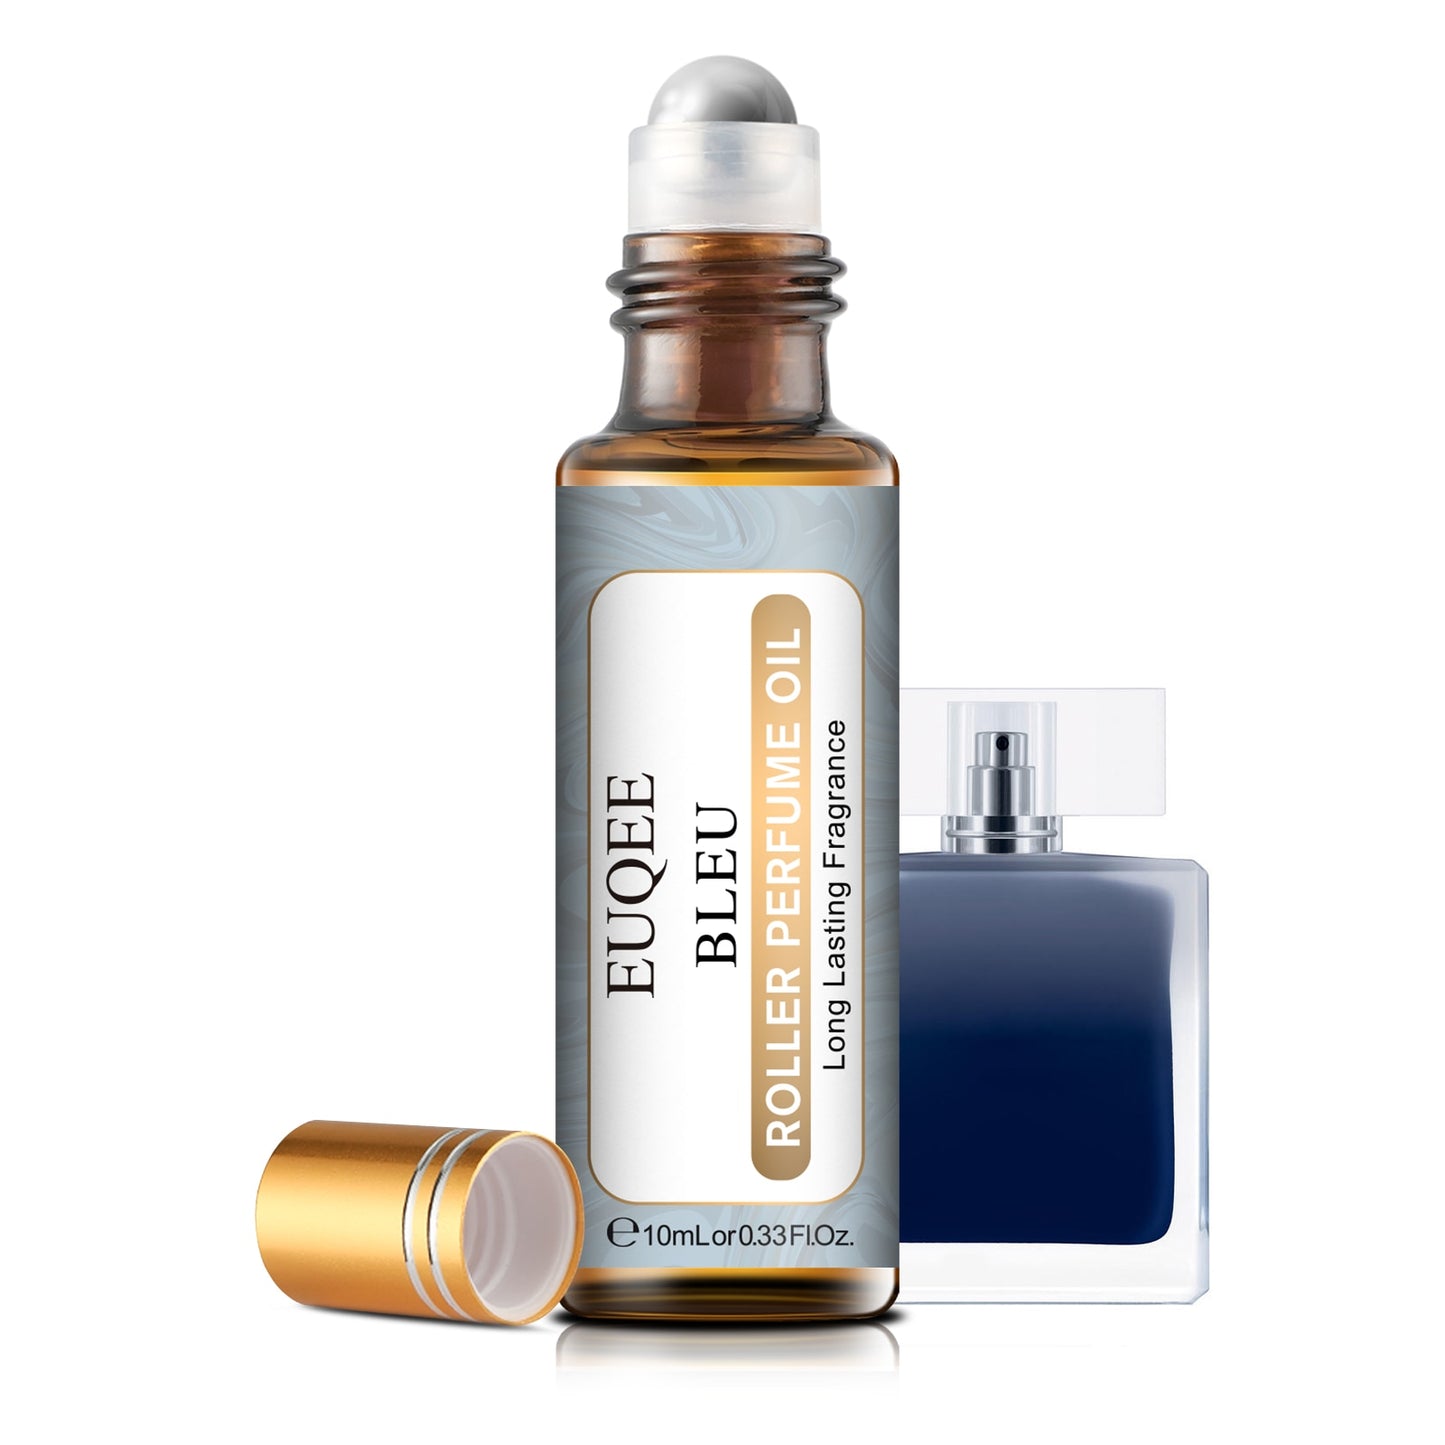 EUQEE Men's Perfume Oil with Roller Smear Oud Wood Acqua di Gio Sauvage Bleu Cool Water Light Blue Sweet Tobacco Fragrance Oils